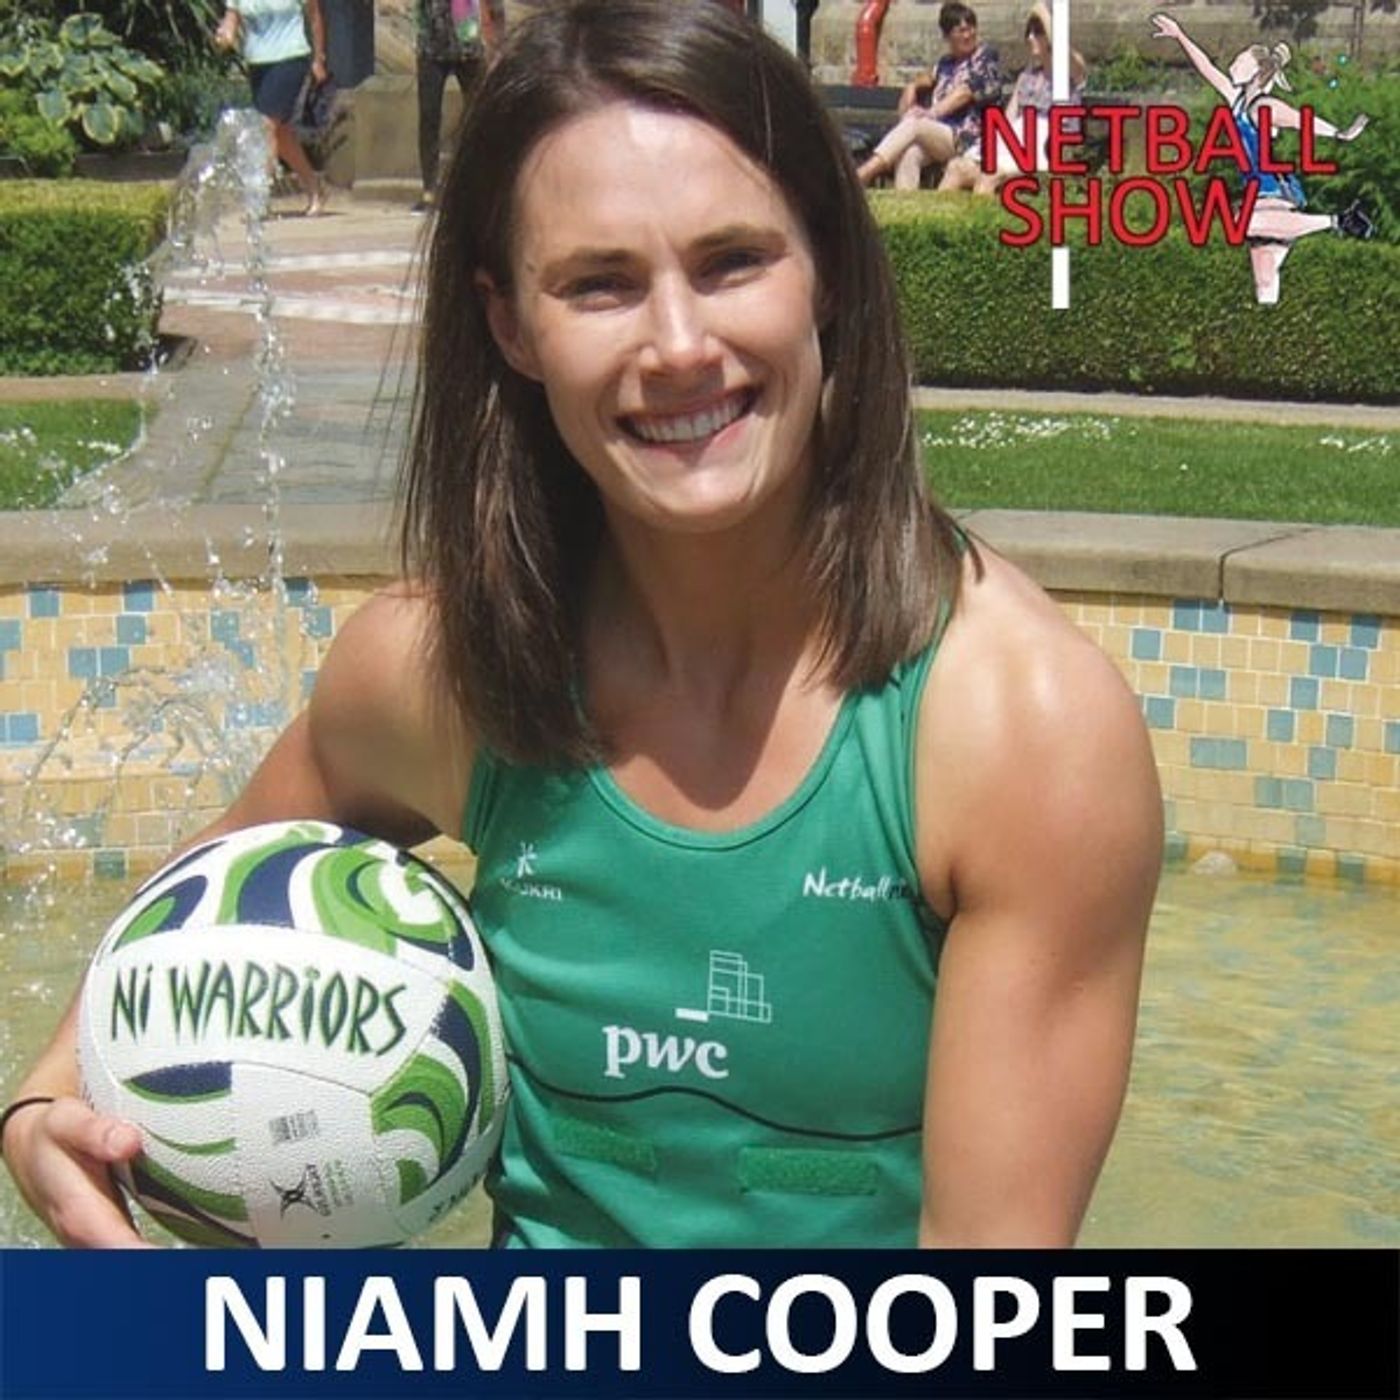 S2 Ep10: Niamh Cooper (11th Oct 2022)